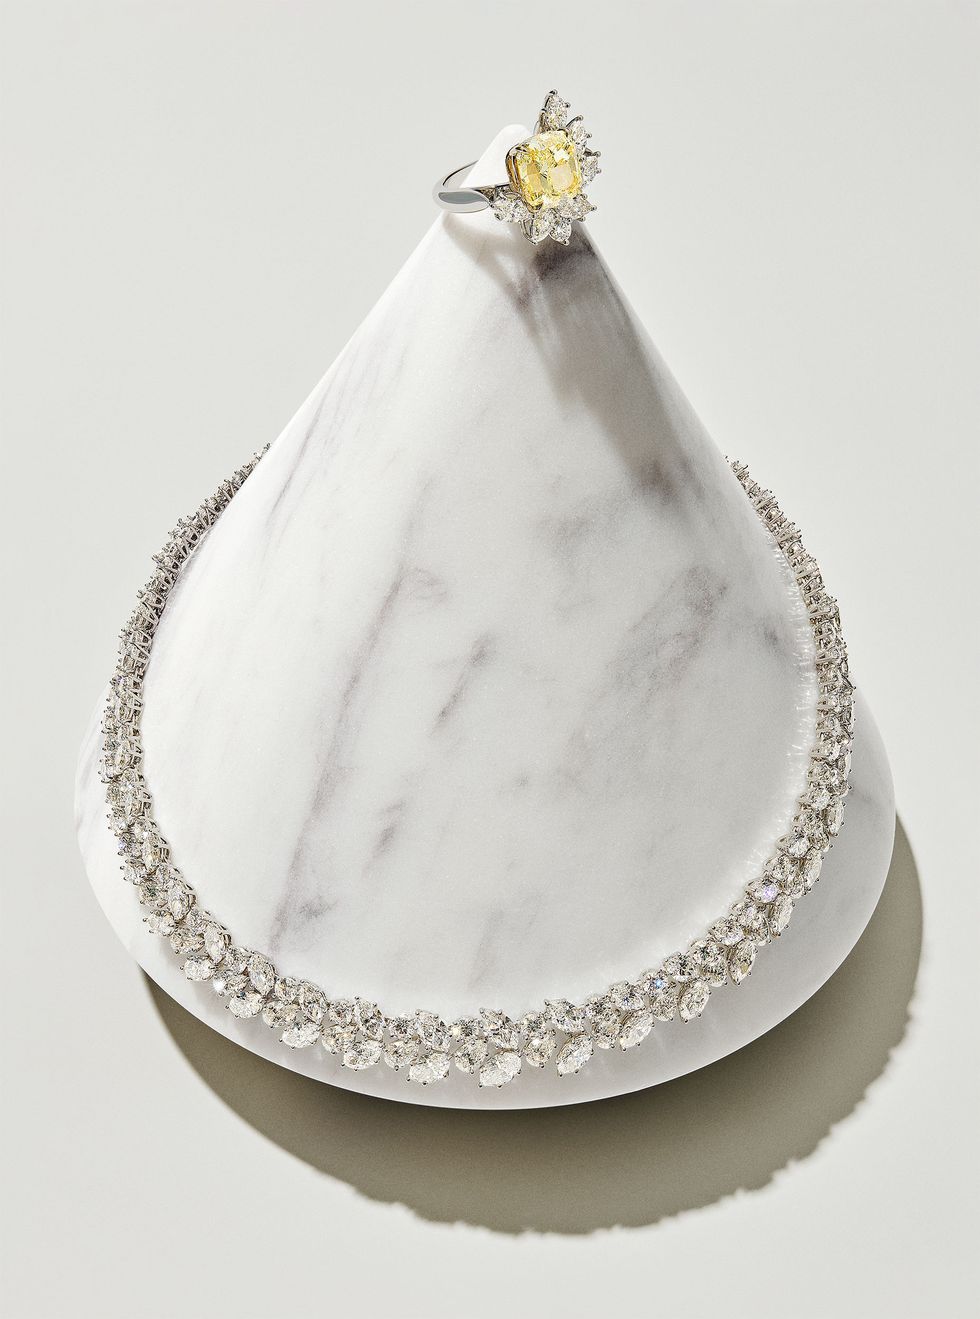 cushion cut yellow diamond ring and diamond cluster necklace displayed on a marble cone with the ring at the pointed top